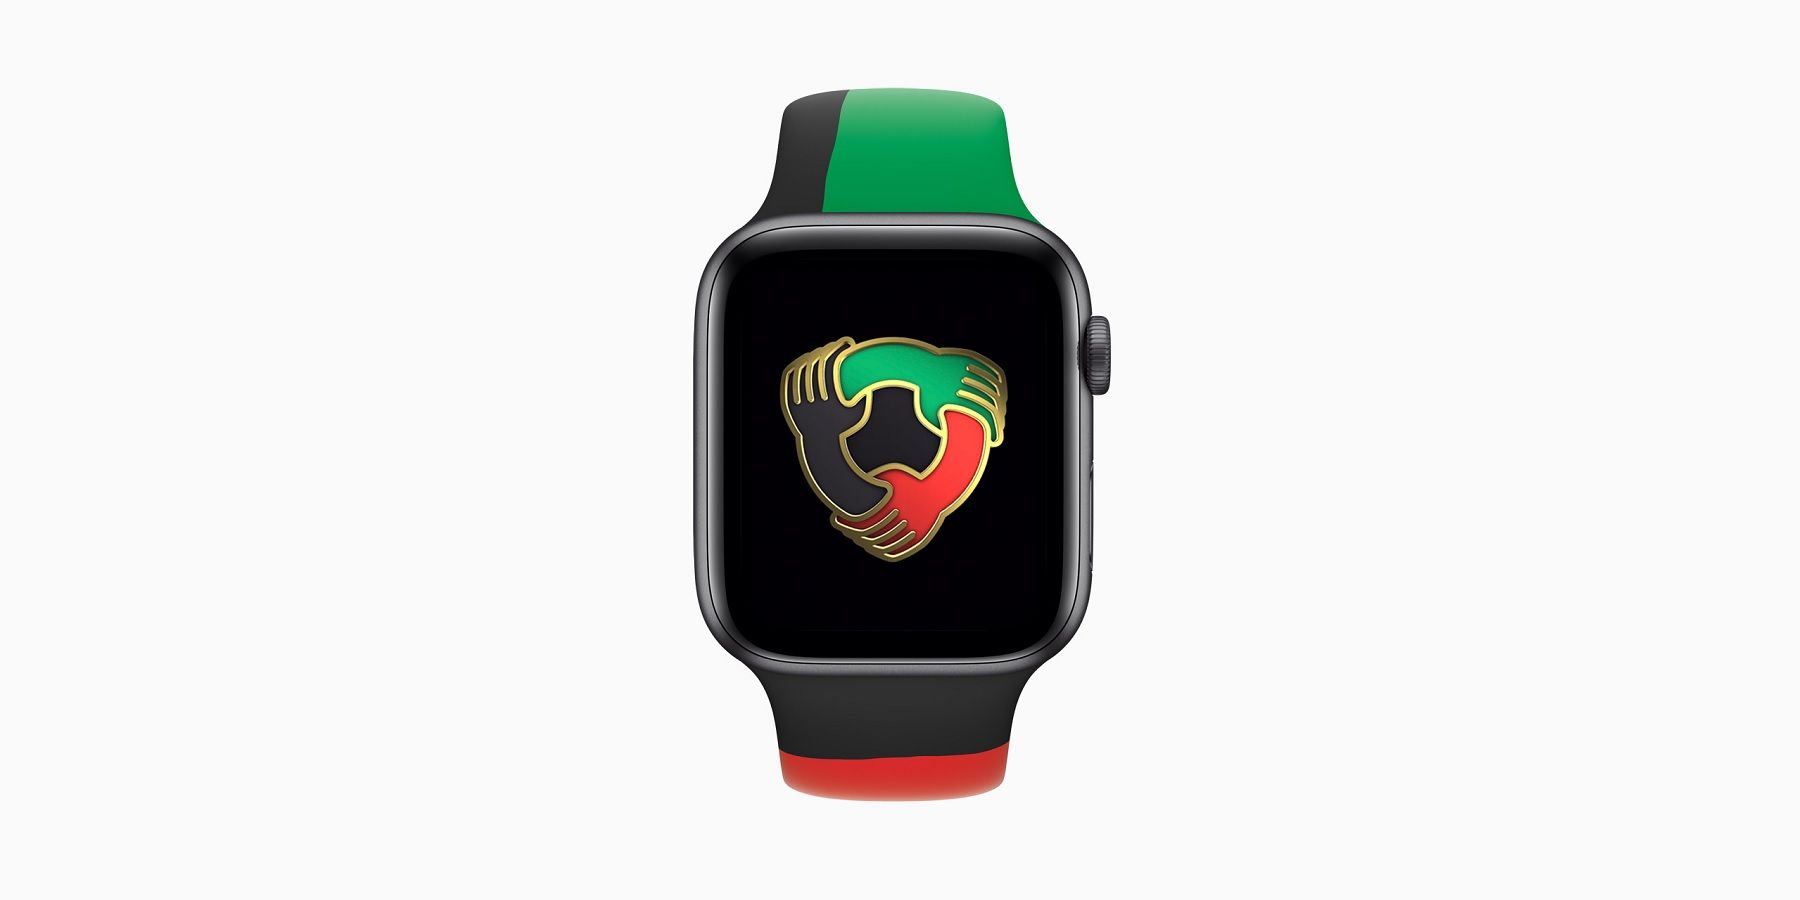 Apple Releasing Black Unity Apple Watch For Black History Month